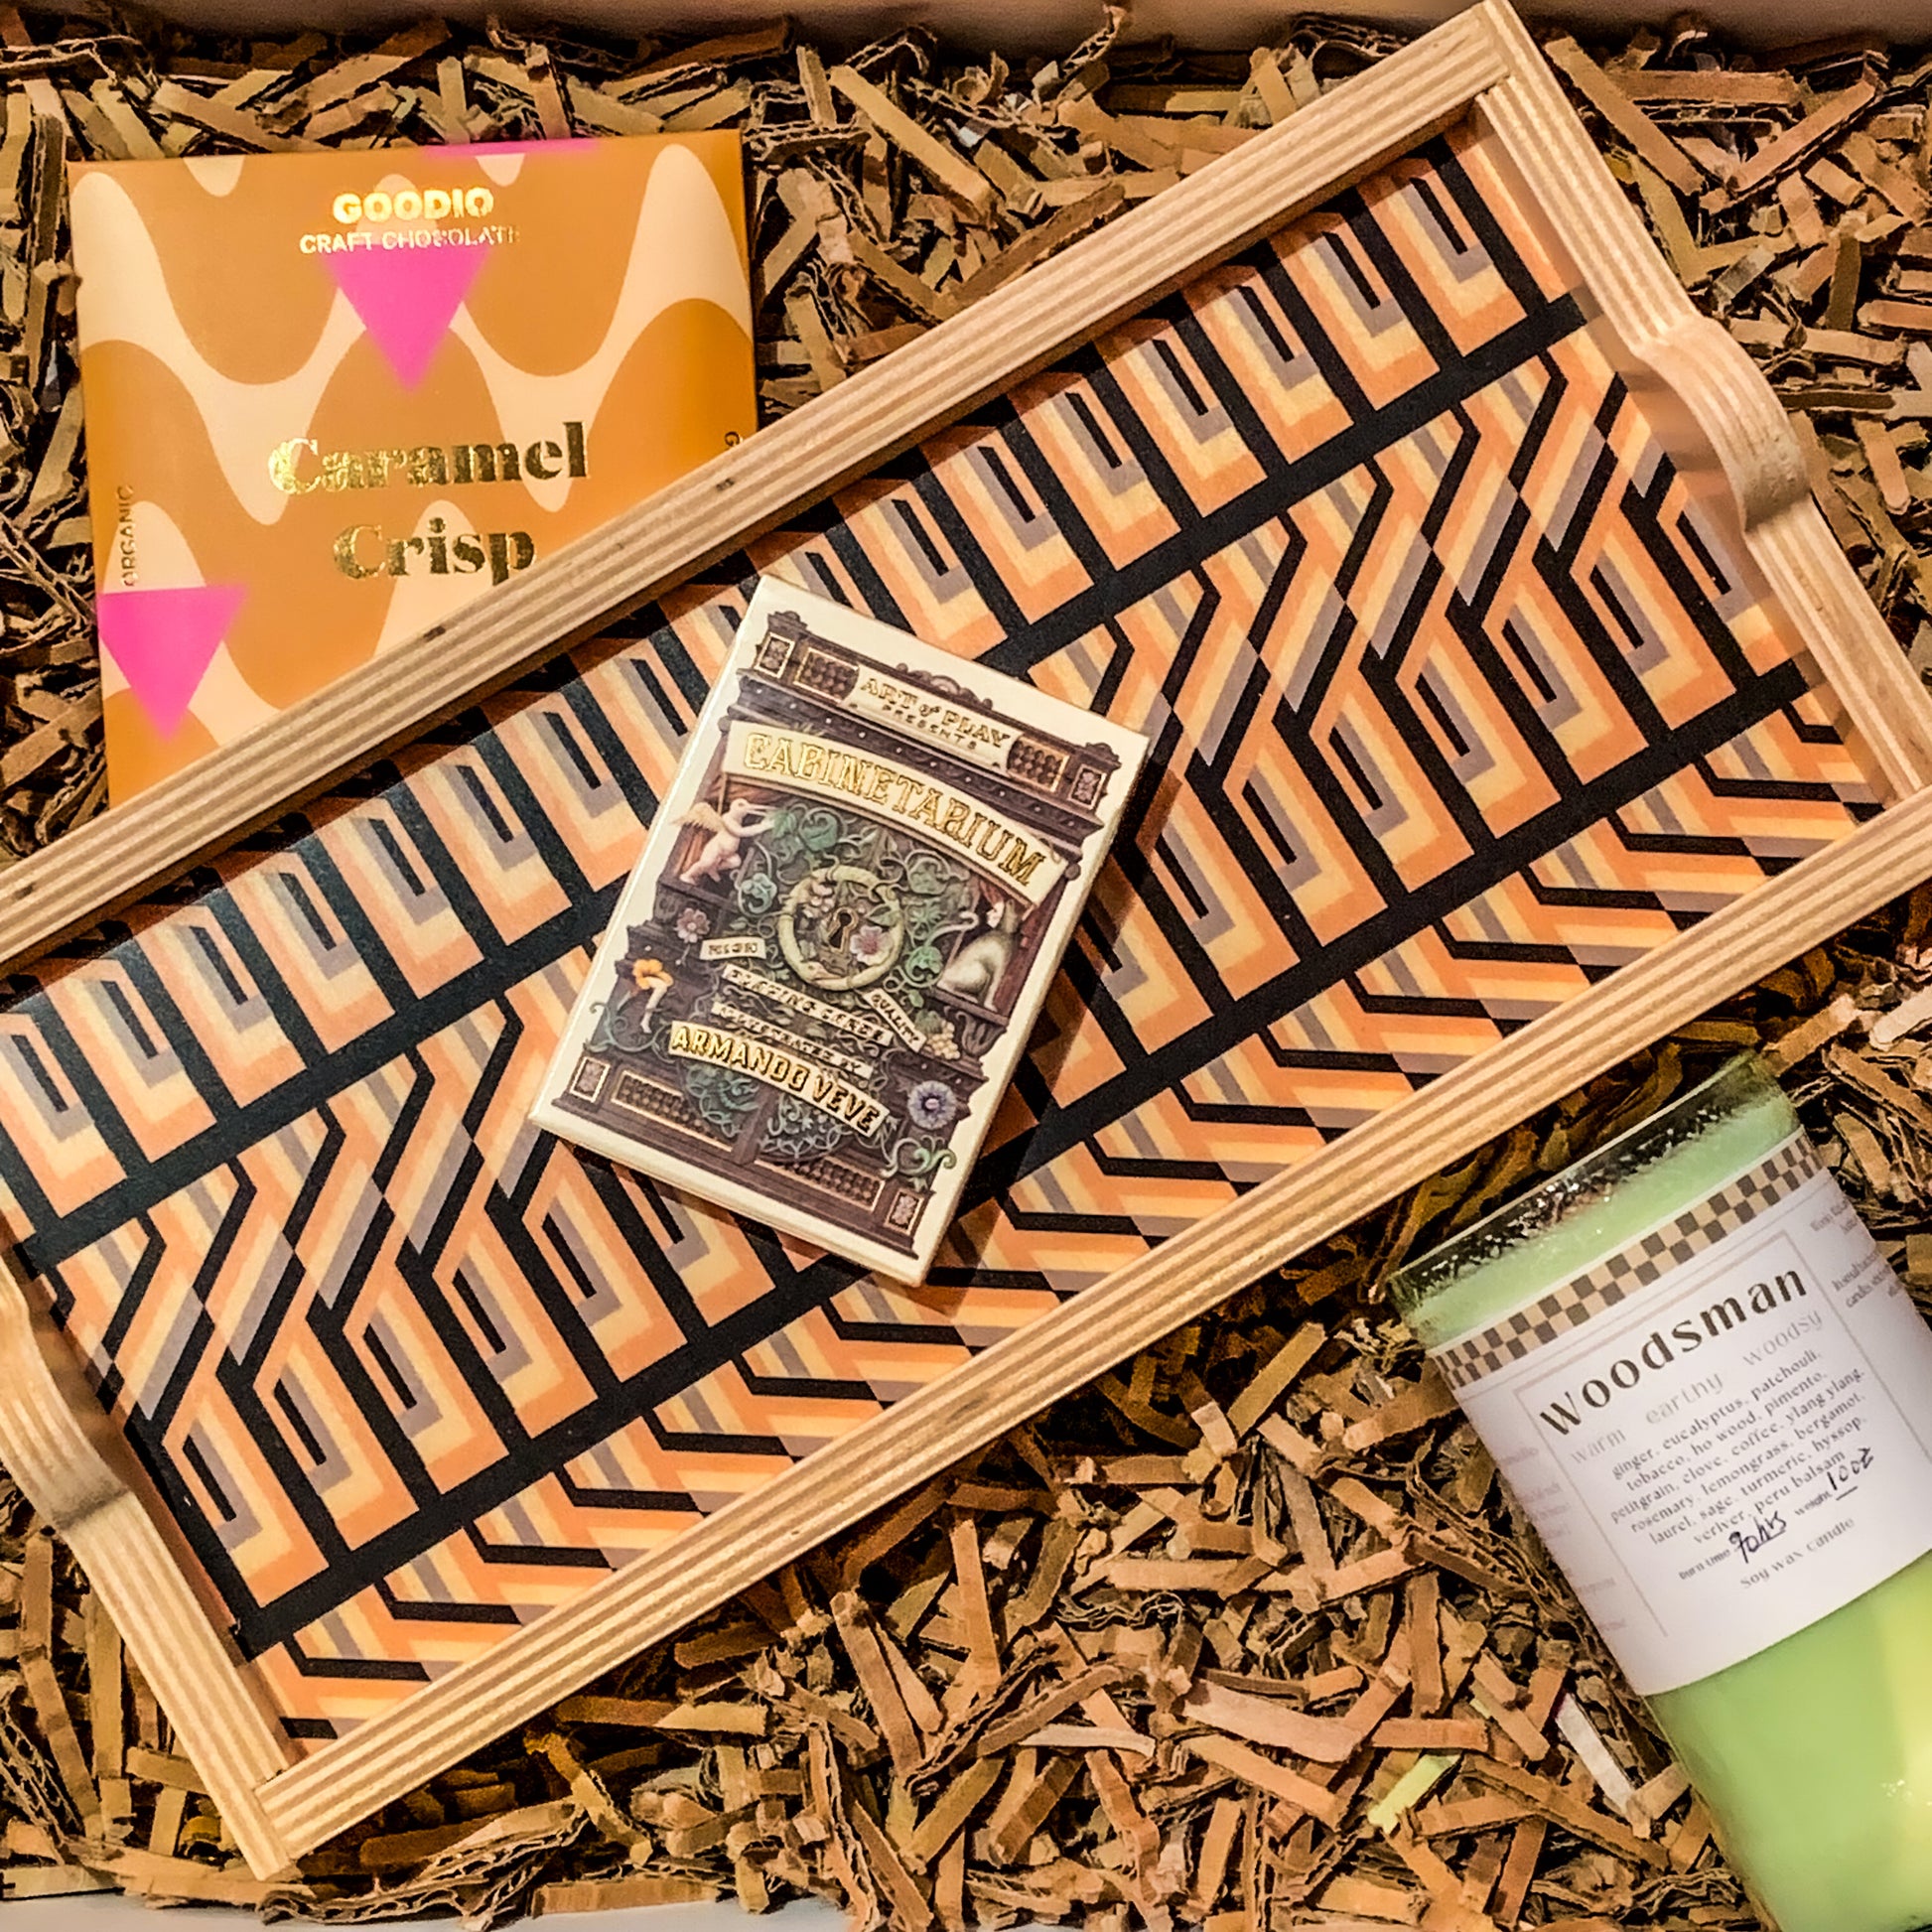 Variation B of Ali's Housewarming gift box: a graphic striped pattern tray with a "cabinetarium" deck of playing cards, vegan caramel chocolate, and a woodsy soy wax candle